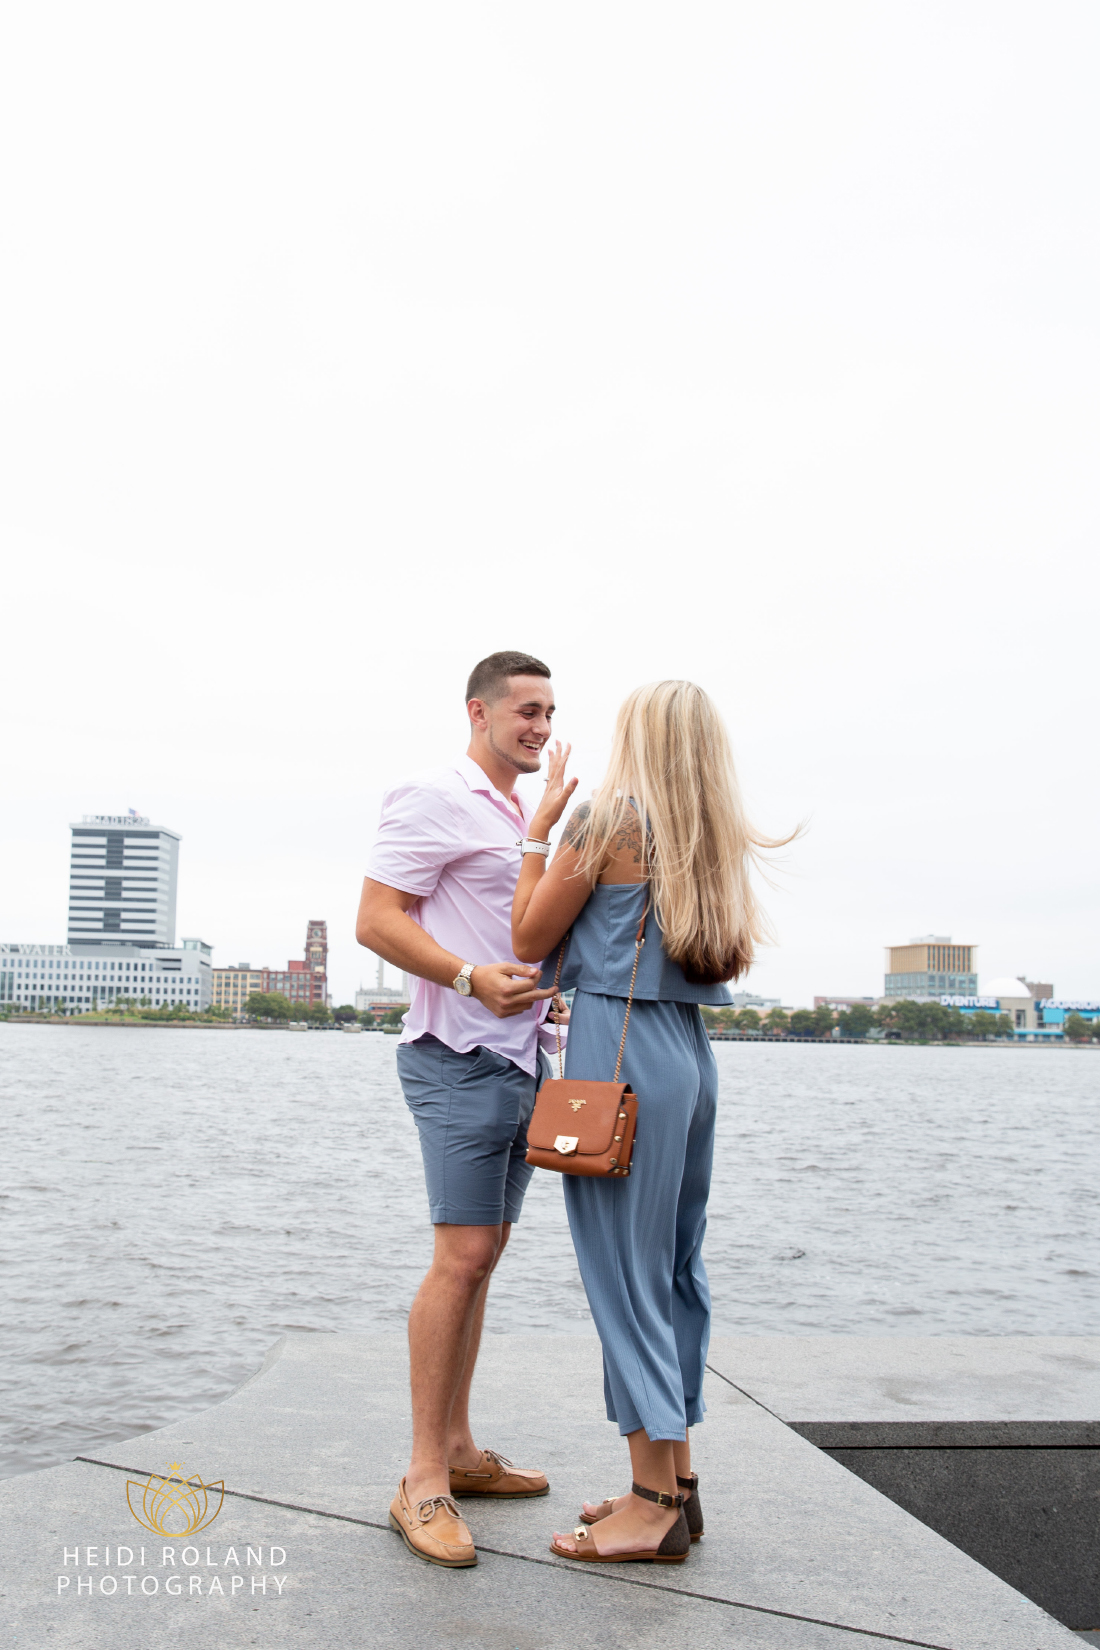 Newly engaged happy couple celebrating after proposal near the Delaware River in Philly